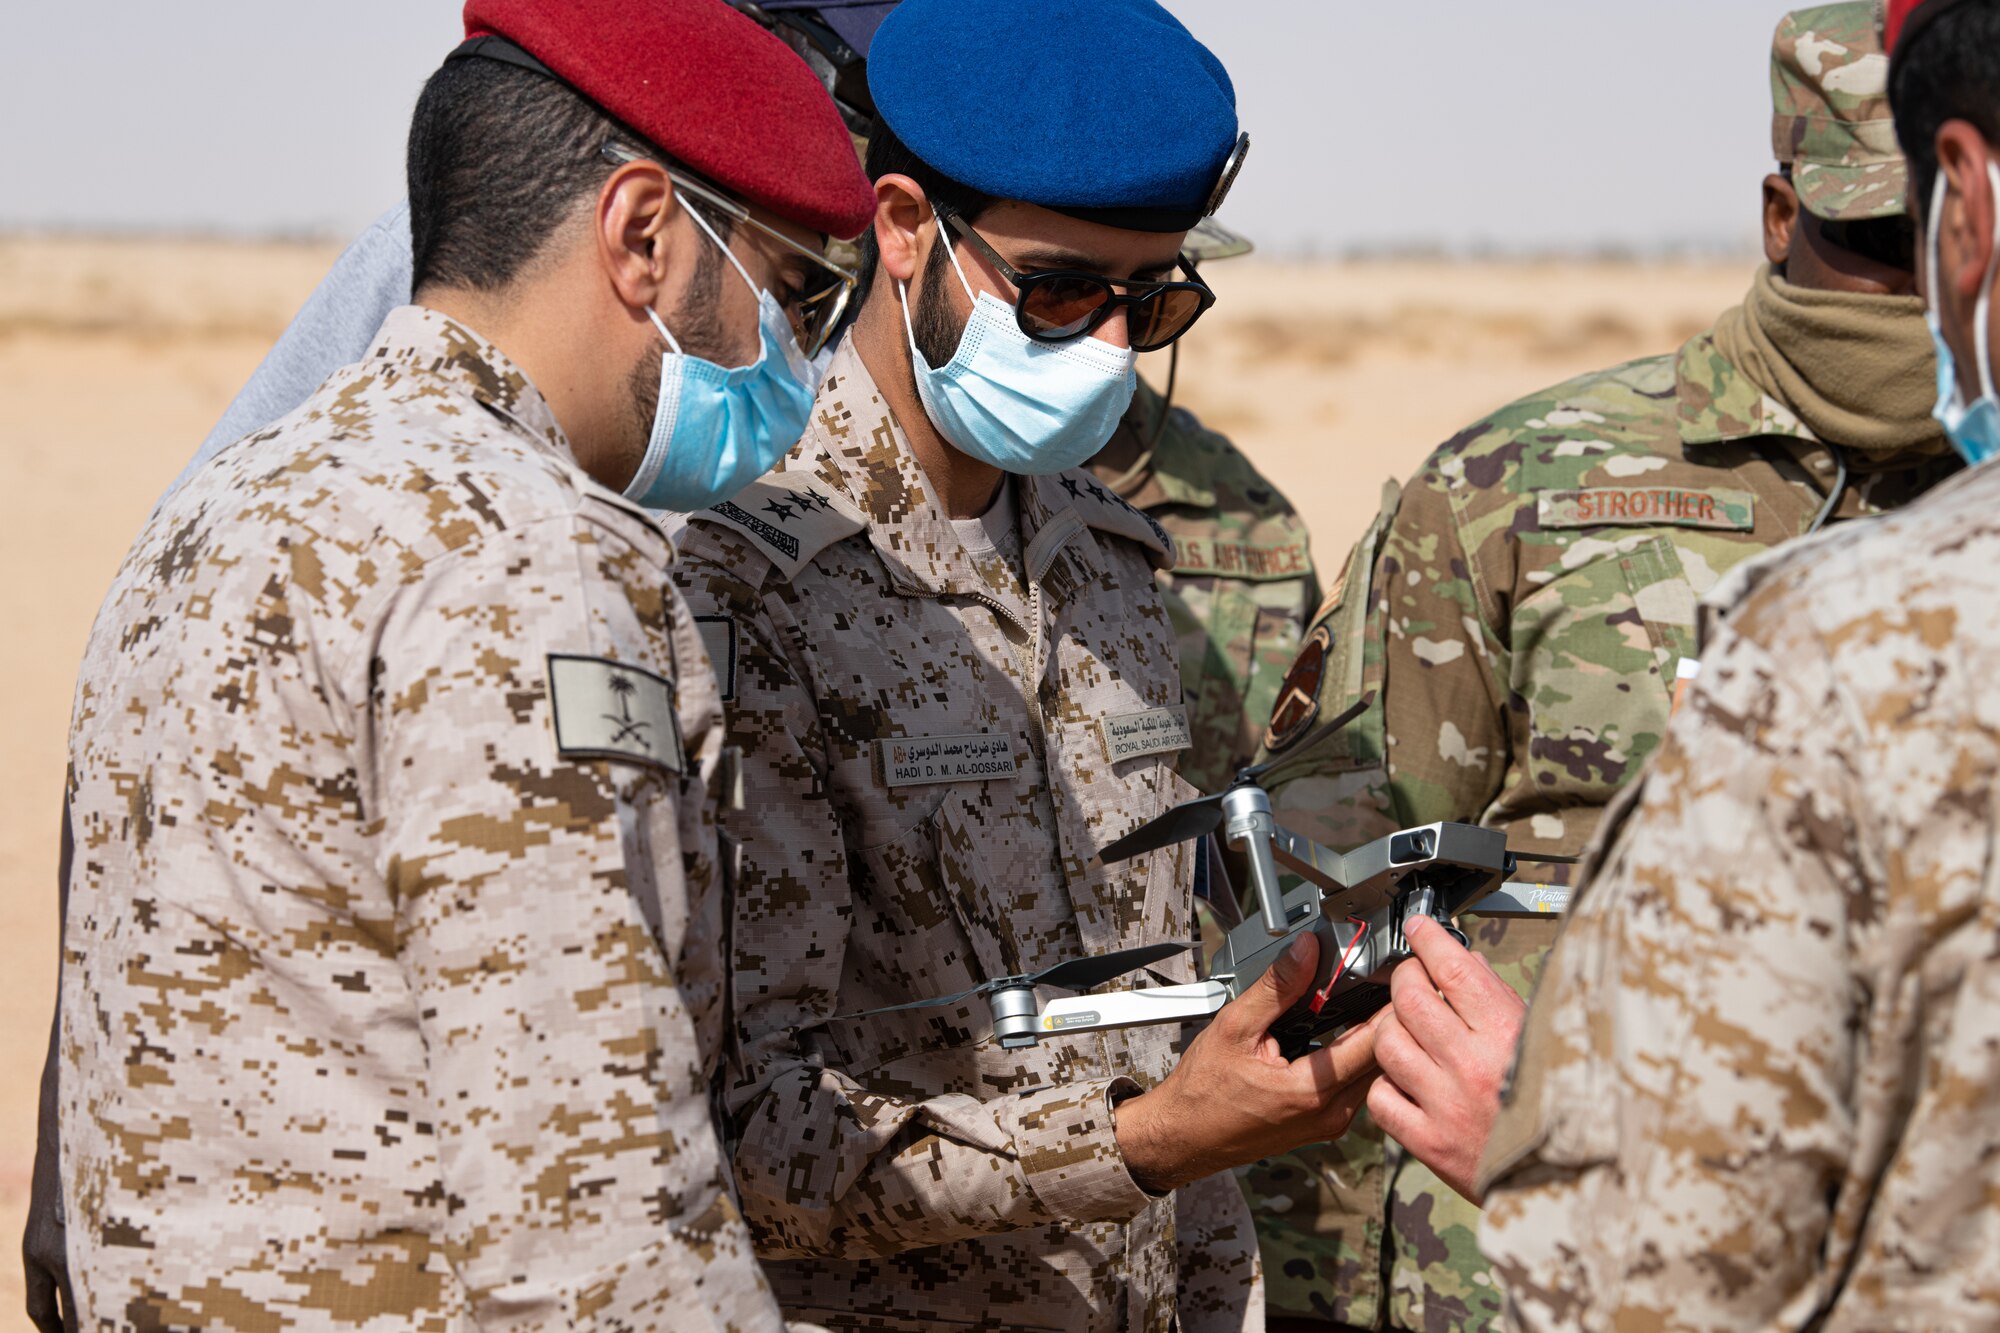 Personnel from the 378th Air Expeditionary Wing trained with Royal Saudi Air Force Police Wing members in a joint counter unmanned aerial system exercise Jan. 27, 2021 at Prince Sultan Air Base, Kingdom of Saudi Arabia.